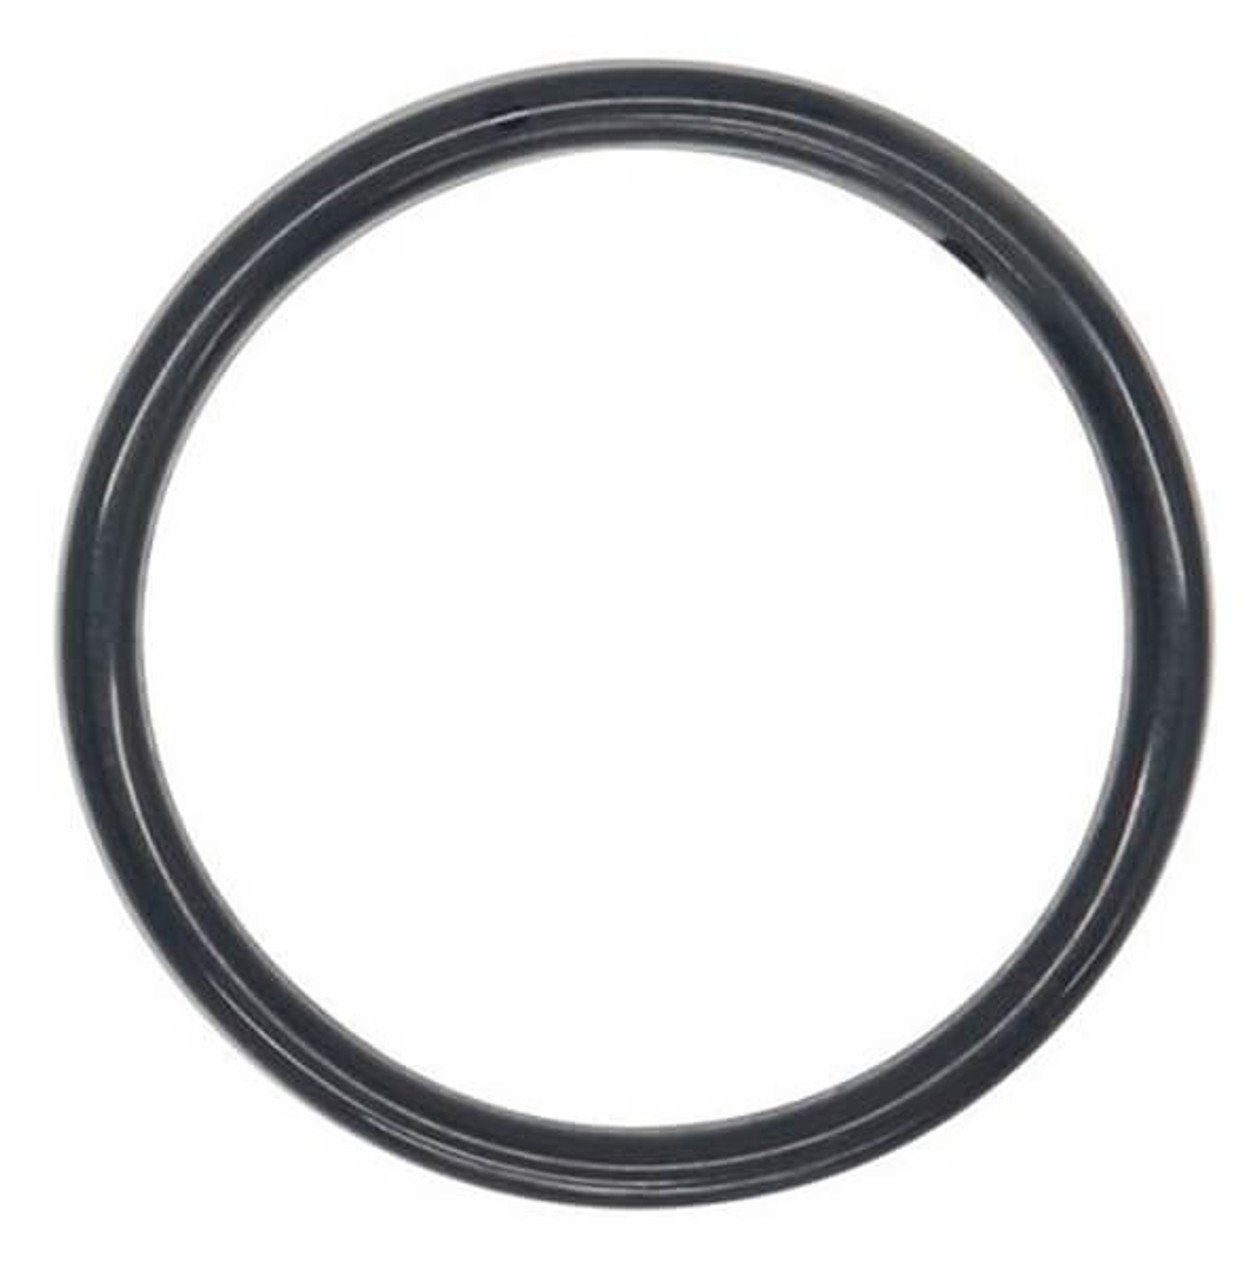 04-2390-52 Buna O-Ring for 1.5" Pumps